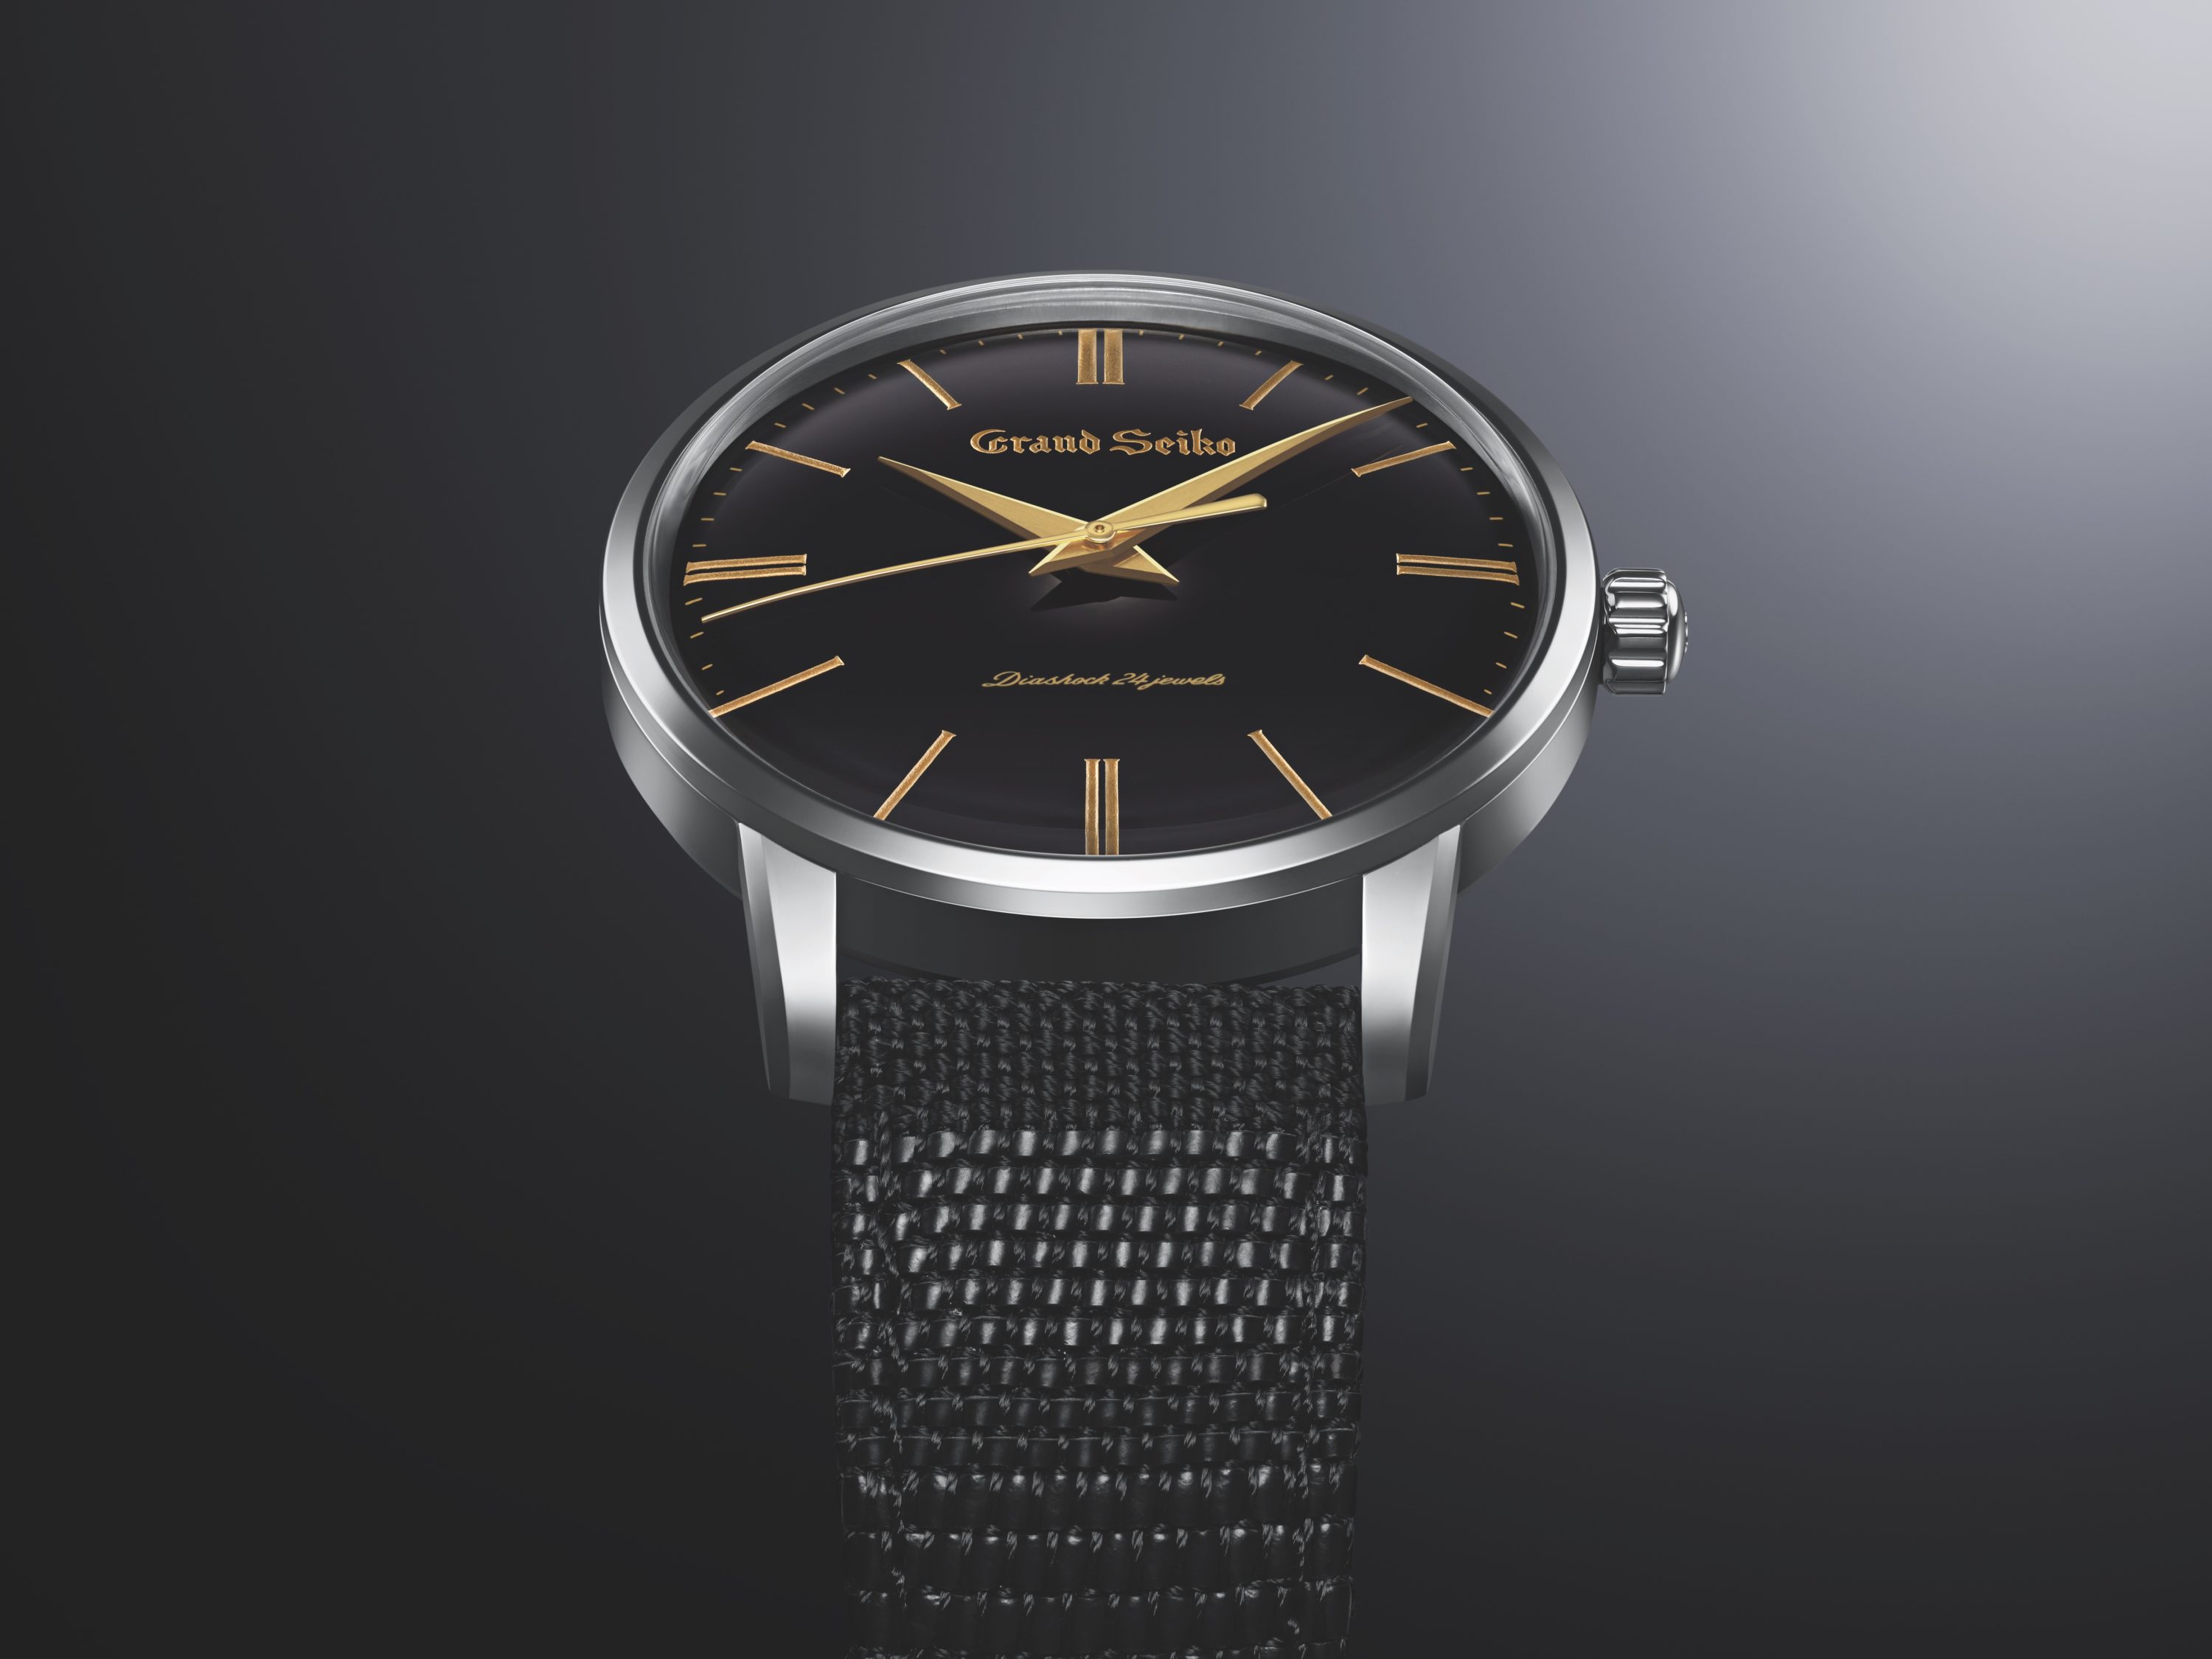 Grand Seiko Introduces Commemorative Edition With a Urushi Dial and Maki-e Indexes